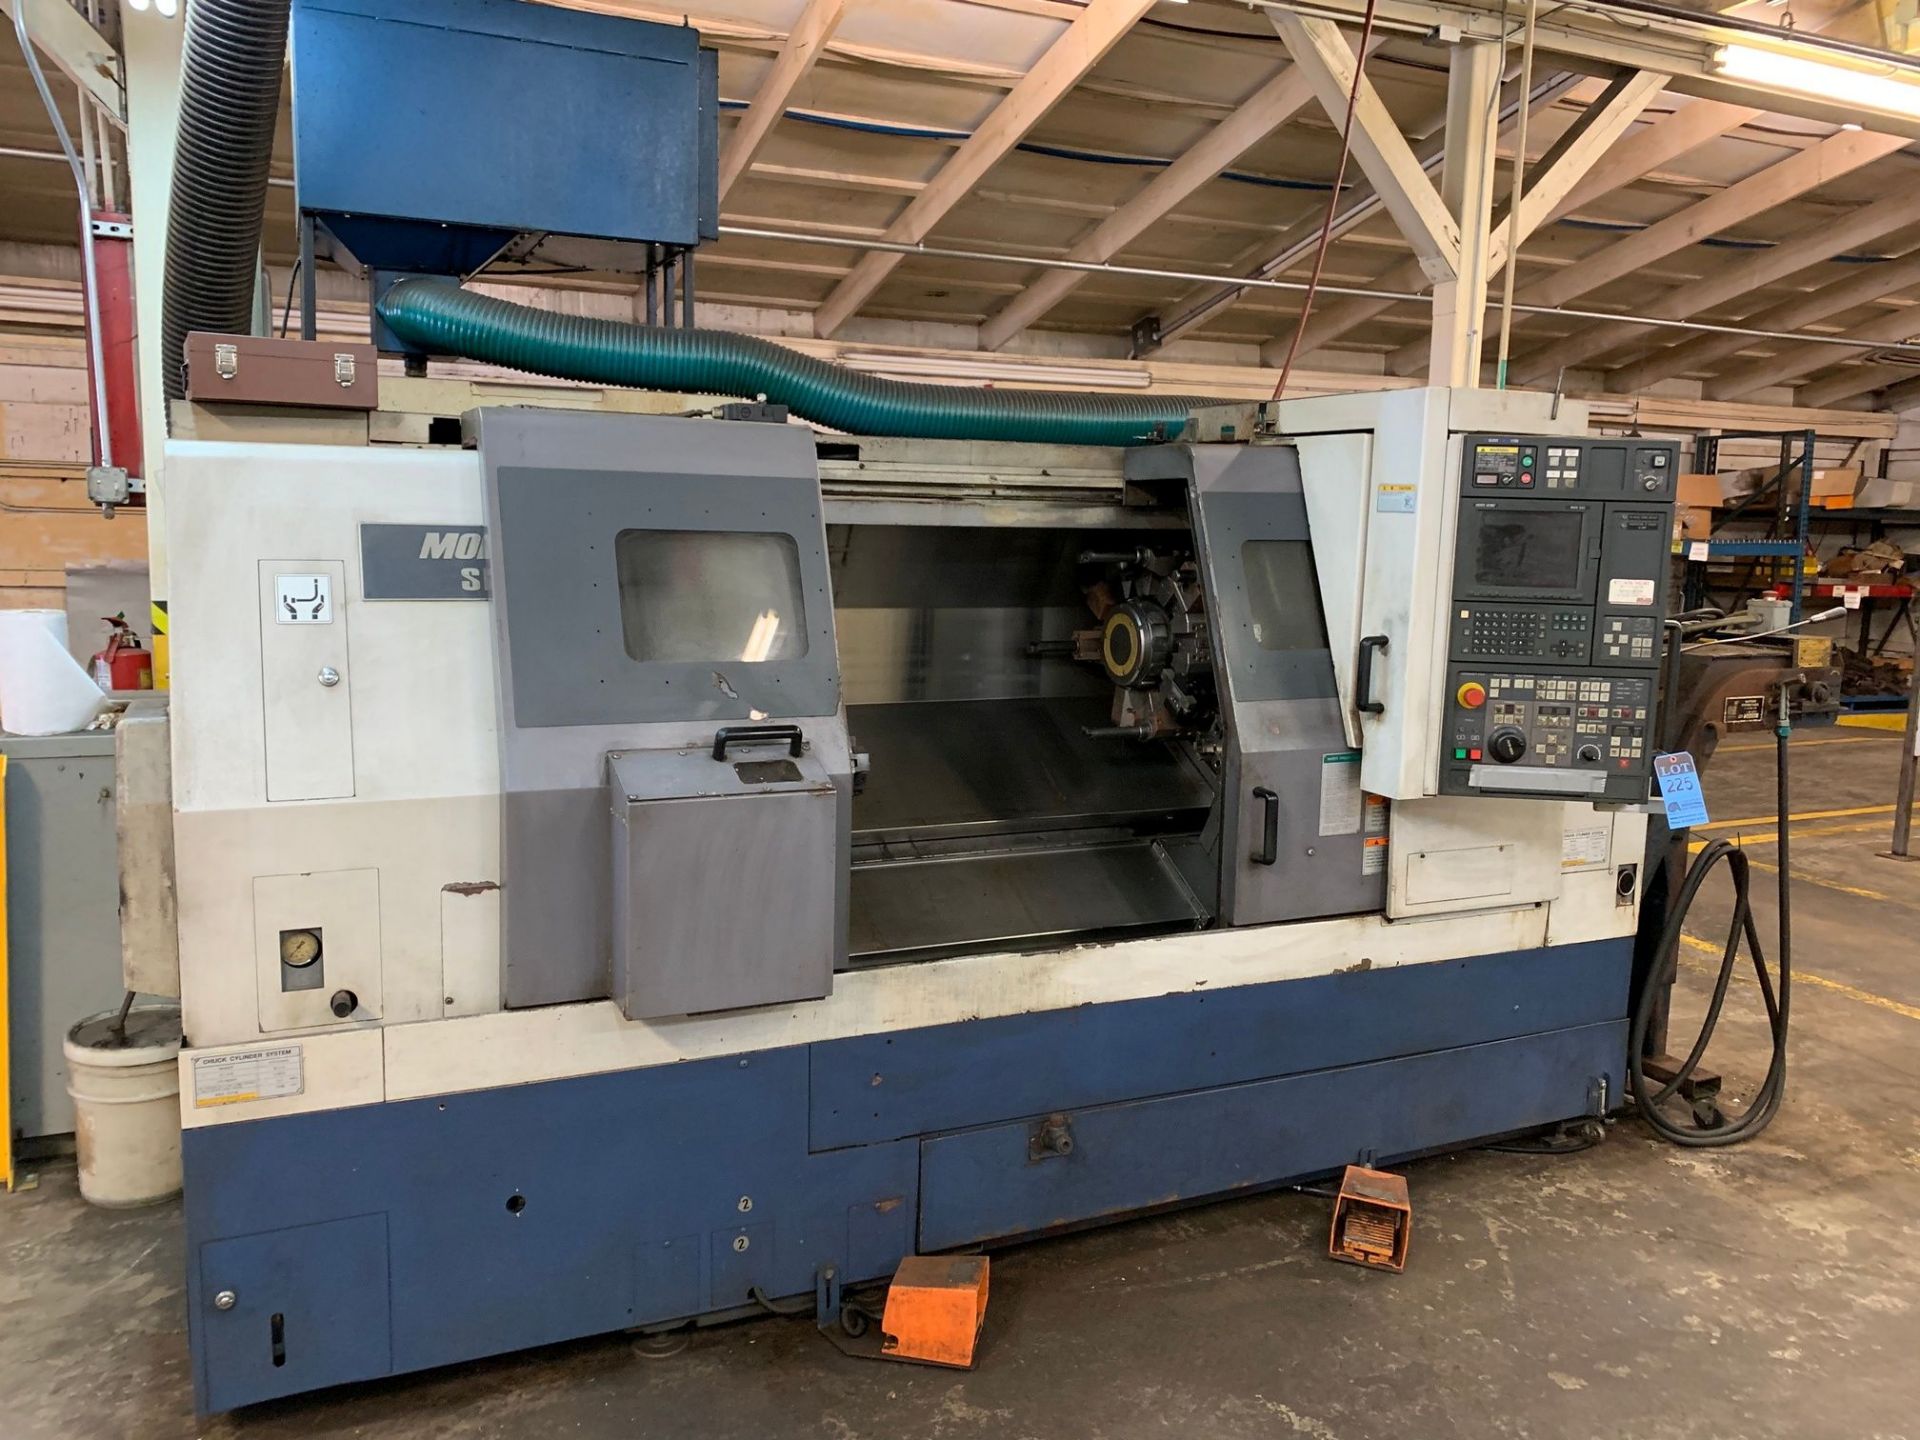 MORI-SEIKI MODEL SL-253 BDMC/1000 CNC TURNING CENTER WITH LIVE TOOLING AND SUB SPINDLE; S/N 1788 (